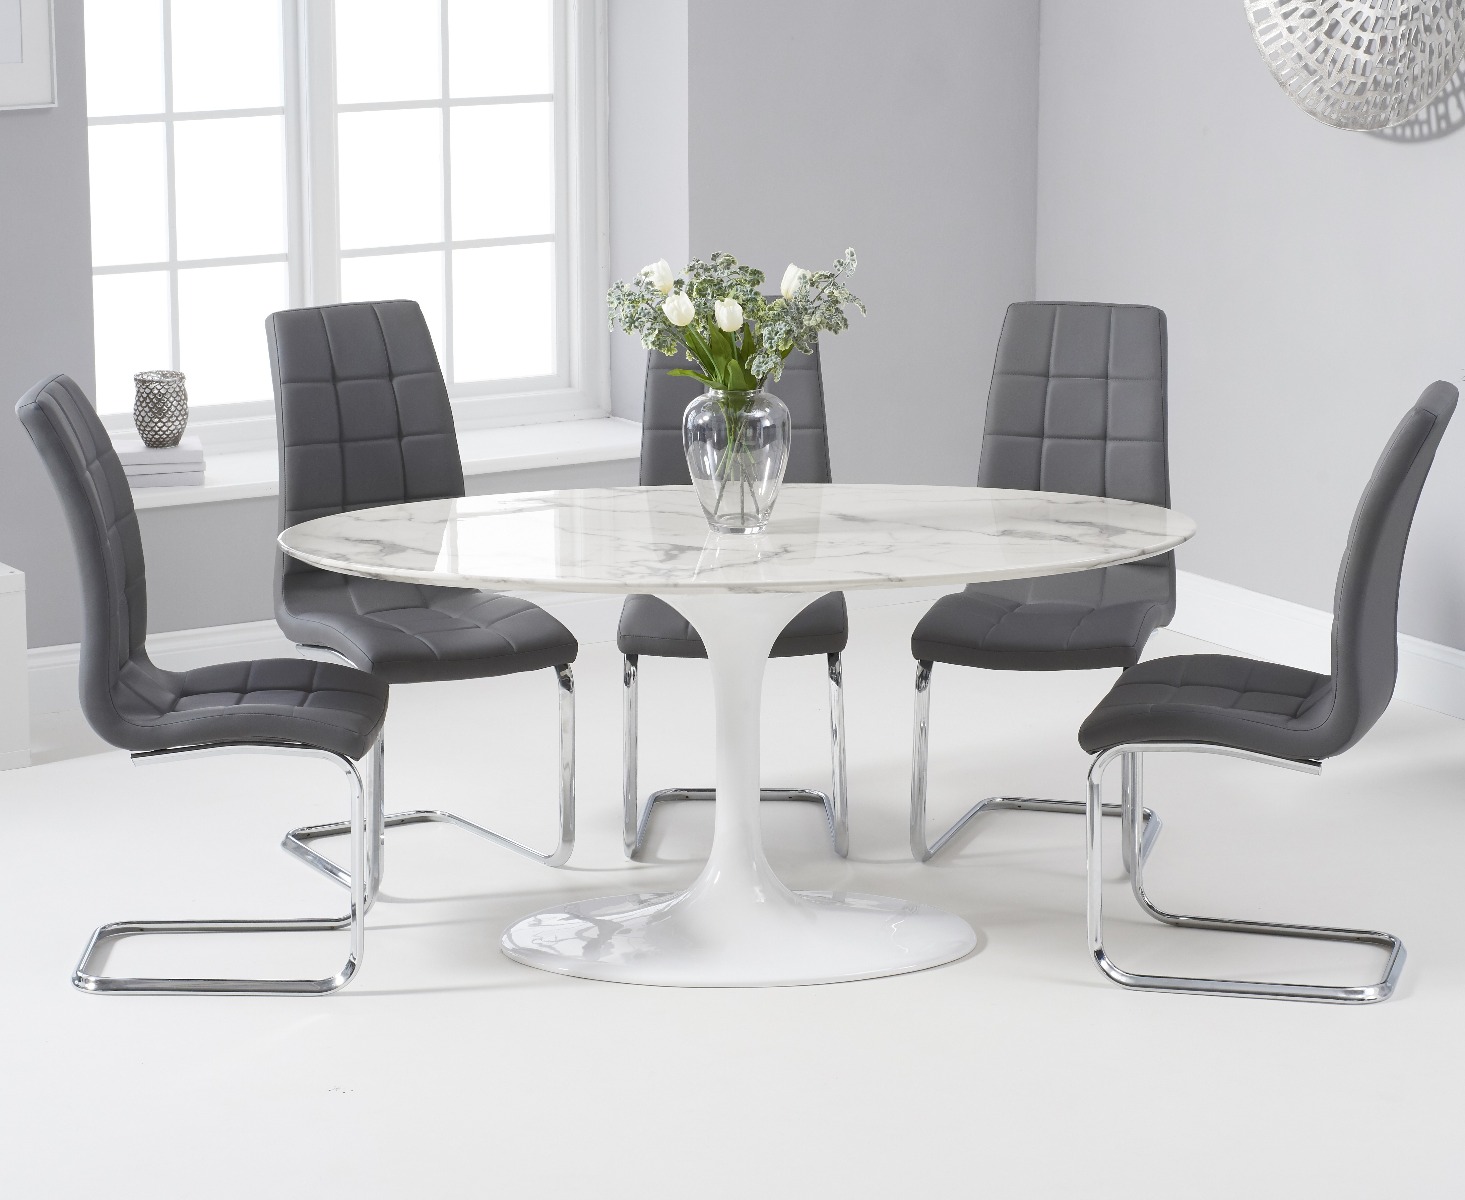 Brighton 160cm Oval White Marble Dining Table With 6 Grey Vigo Dining Chairs